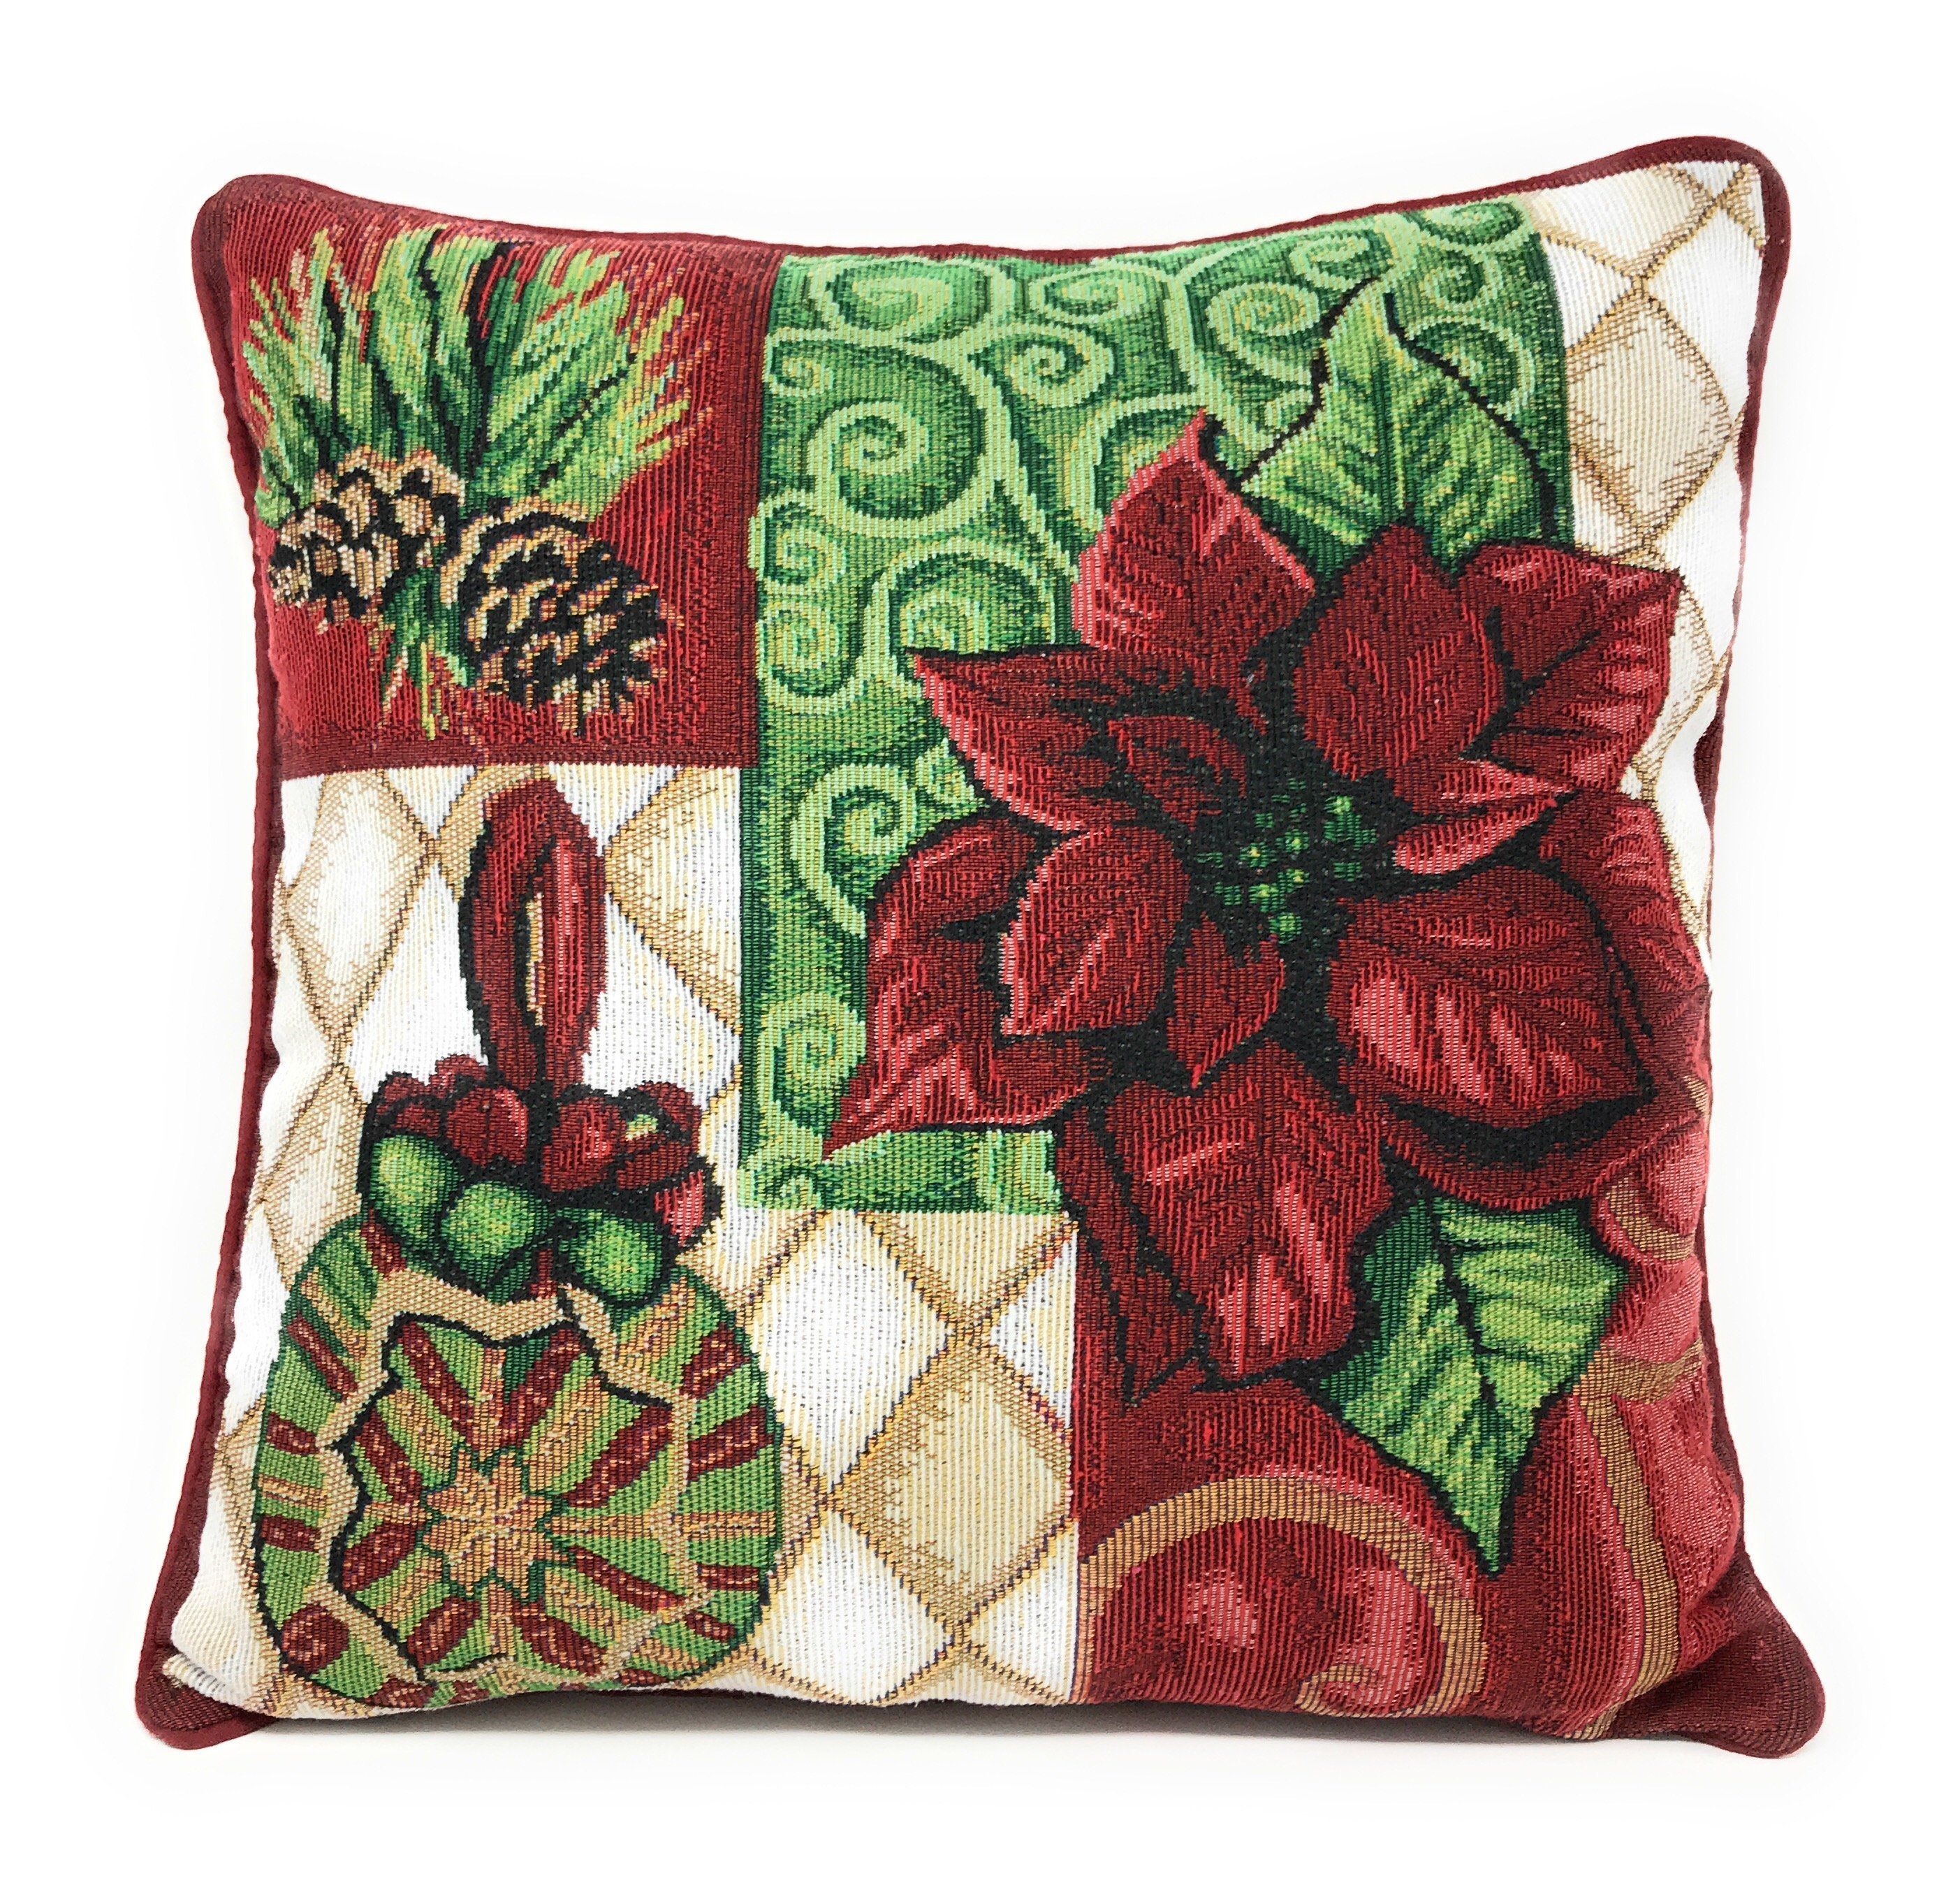 Tache Poinsettia Christmas Festive Patchwork Holiday Tidings Tapestry Throw Pillow Cover (12900CC-1616) - Tache Home Fashion